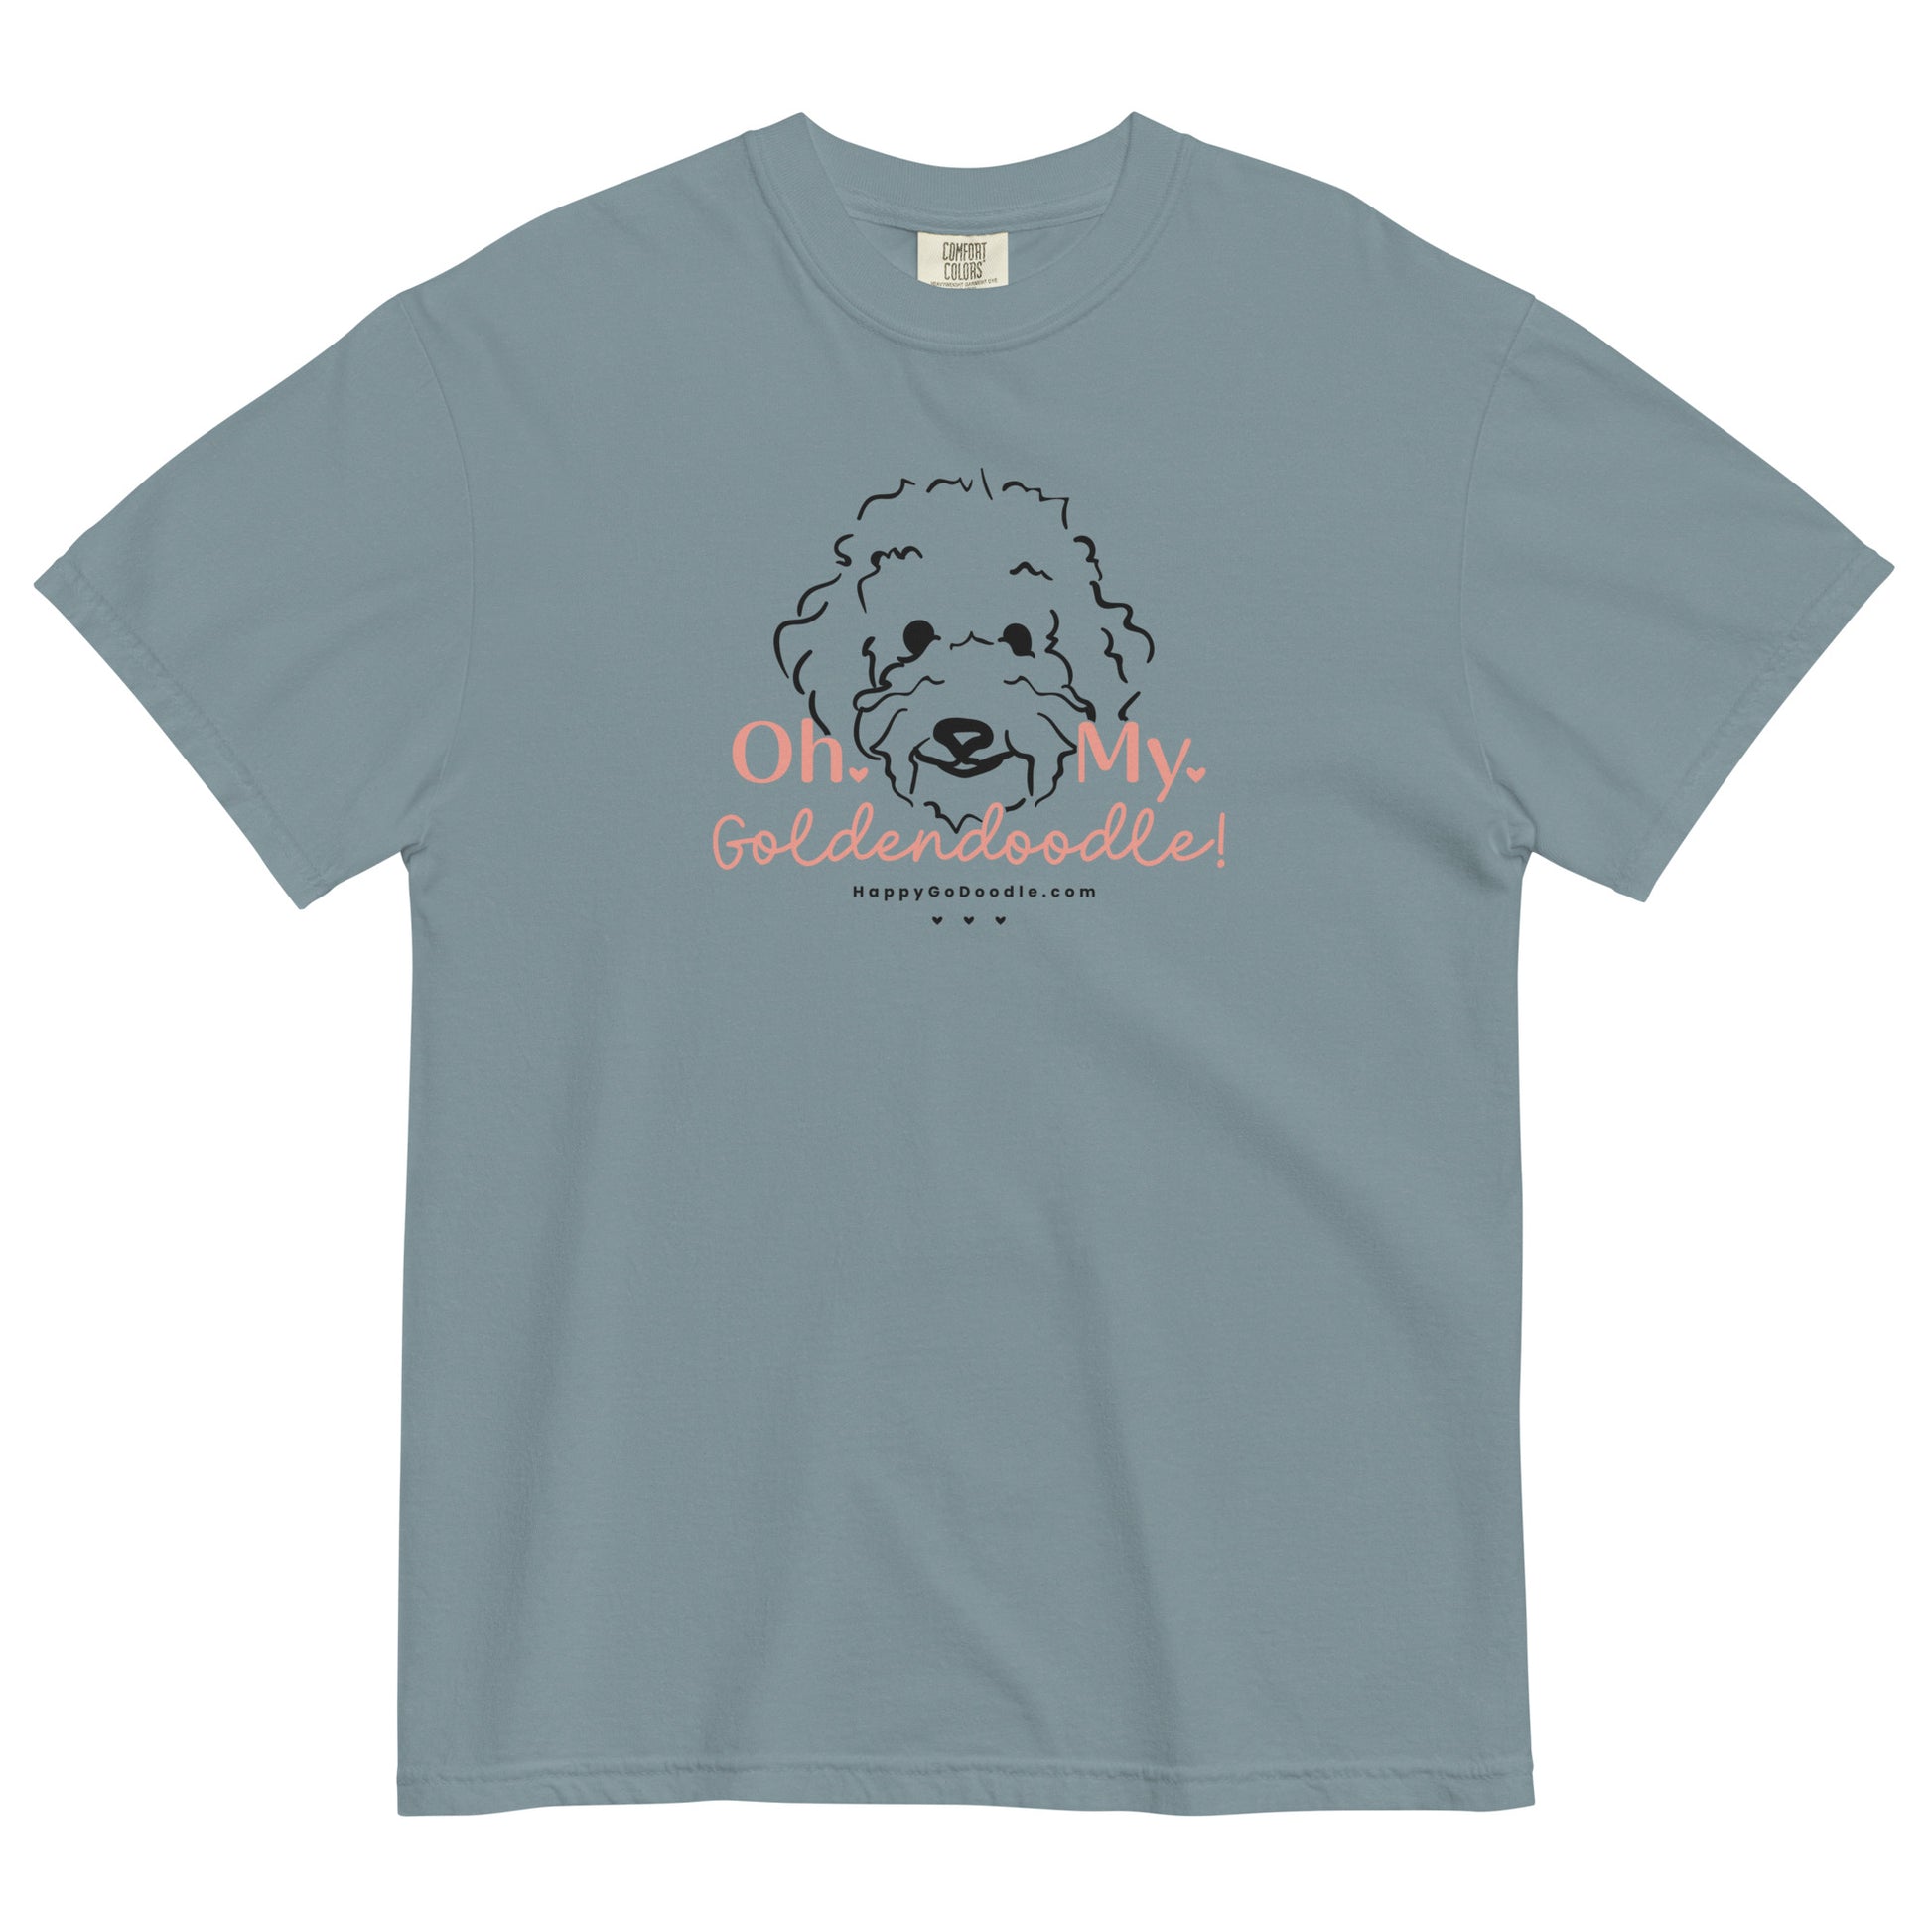 Goldendoodle comfort colors t-shirt with Goldendoodle dog face and words "Oh My Goldendoodle" in ice blue color